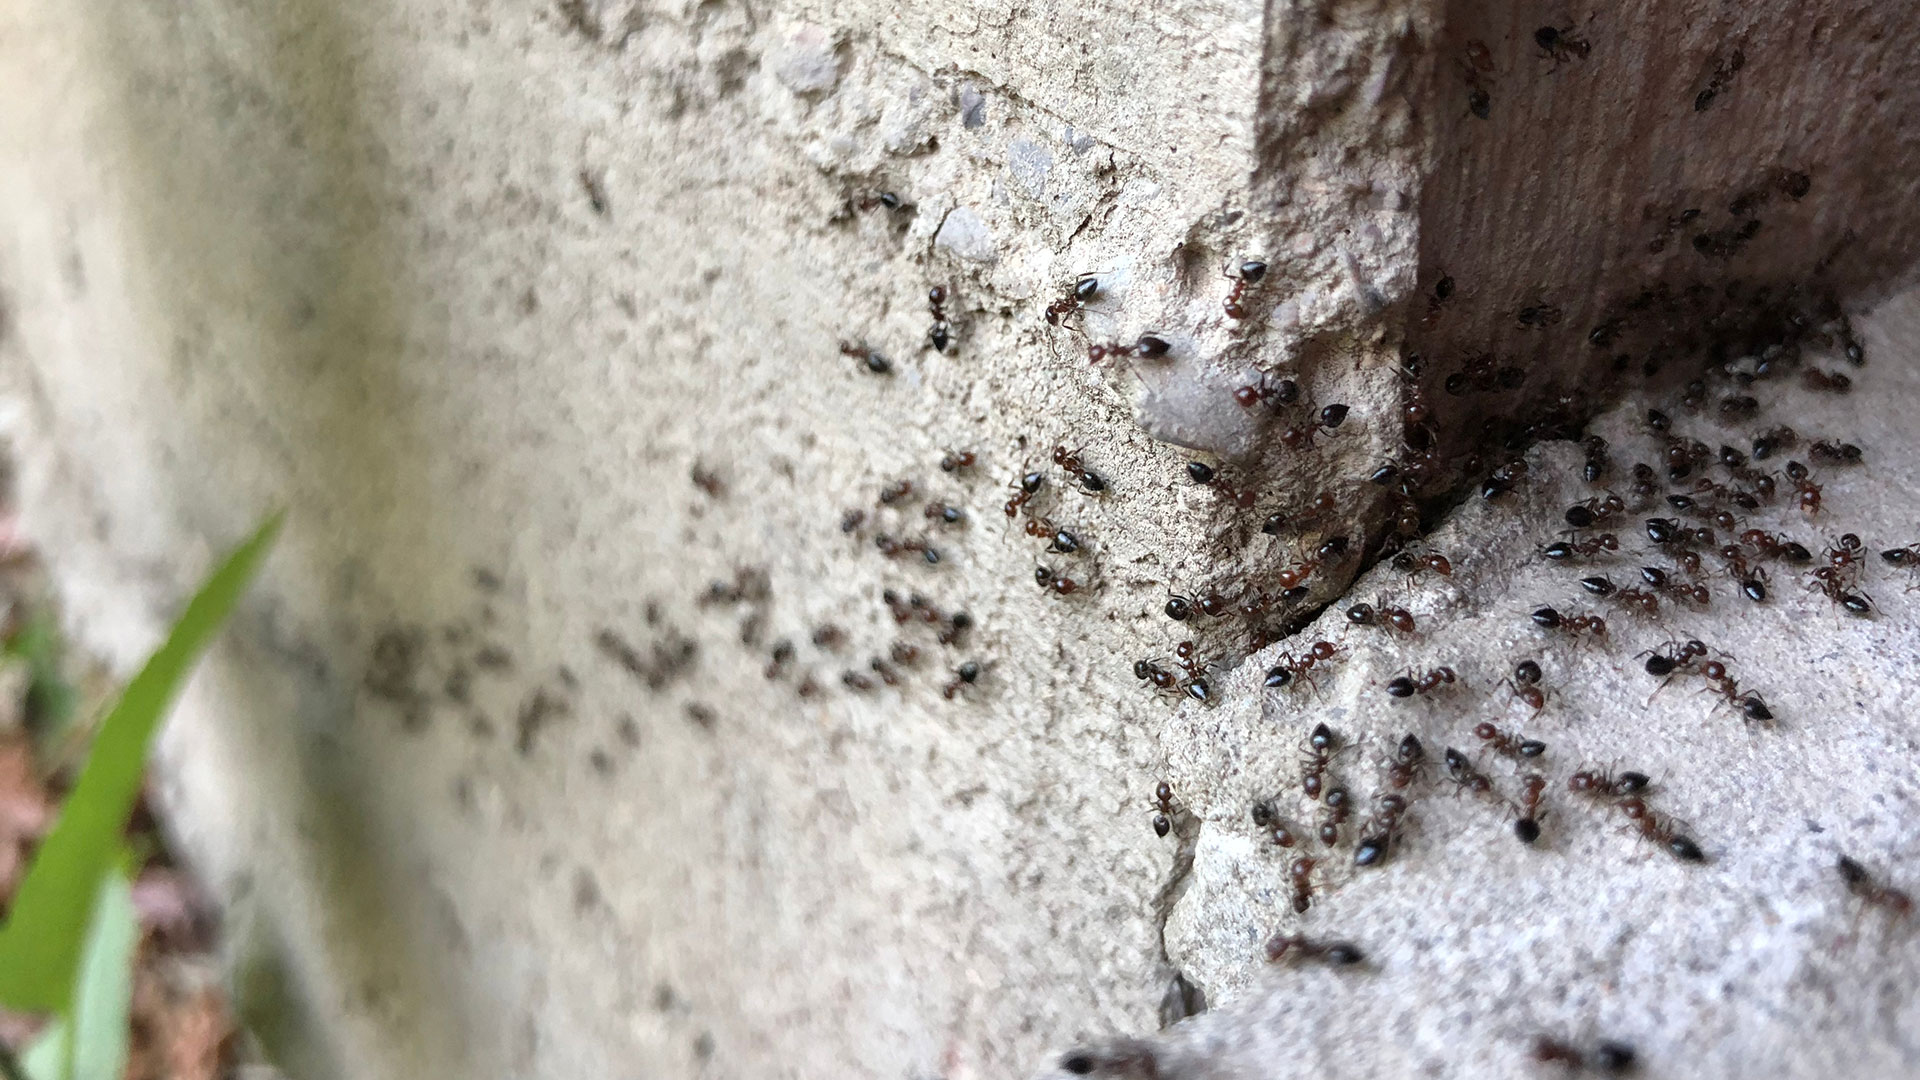 Ants invading a home in Memphis, TN.